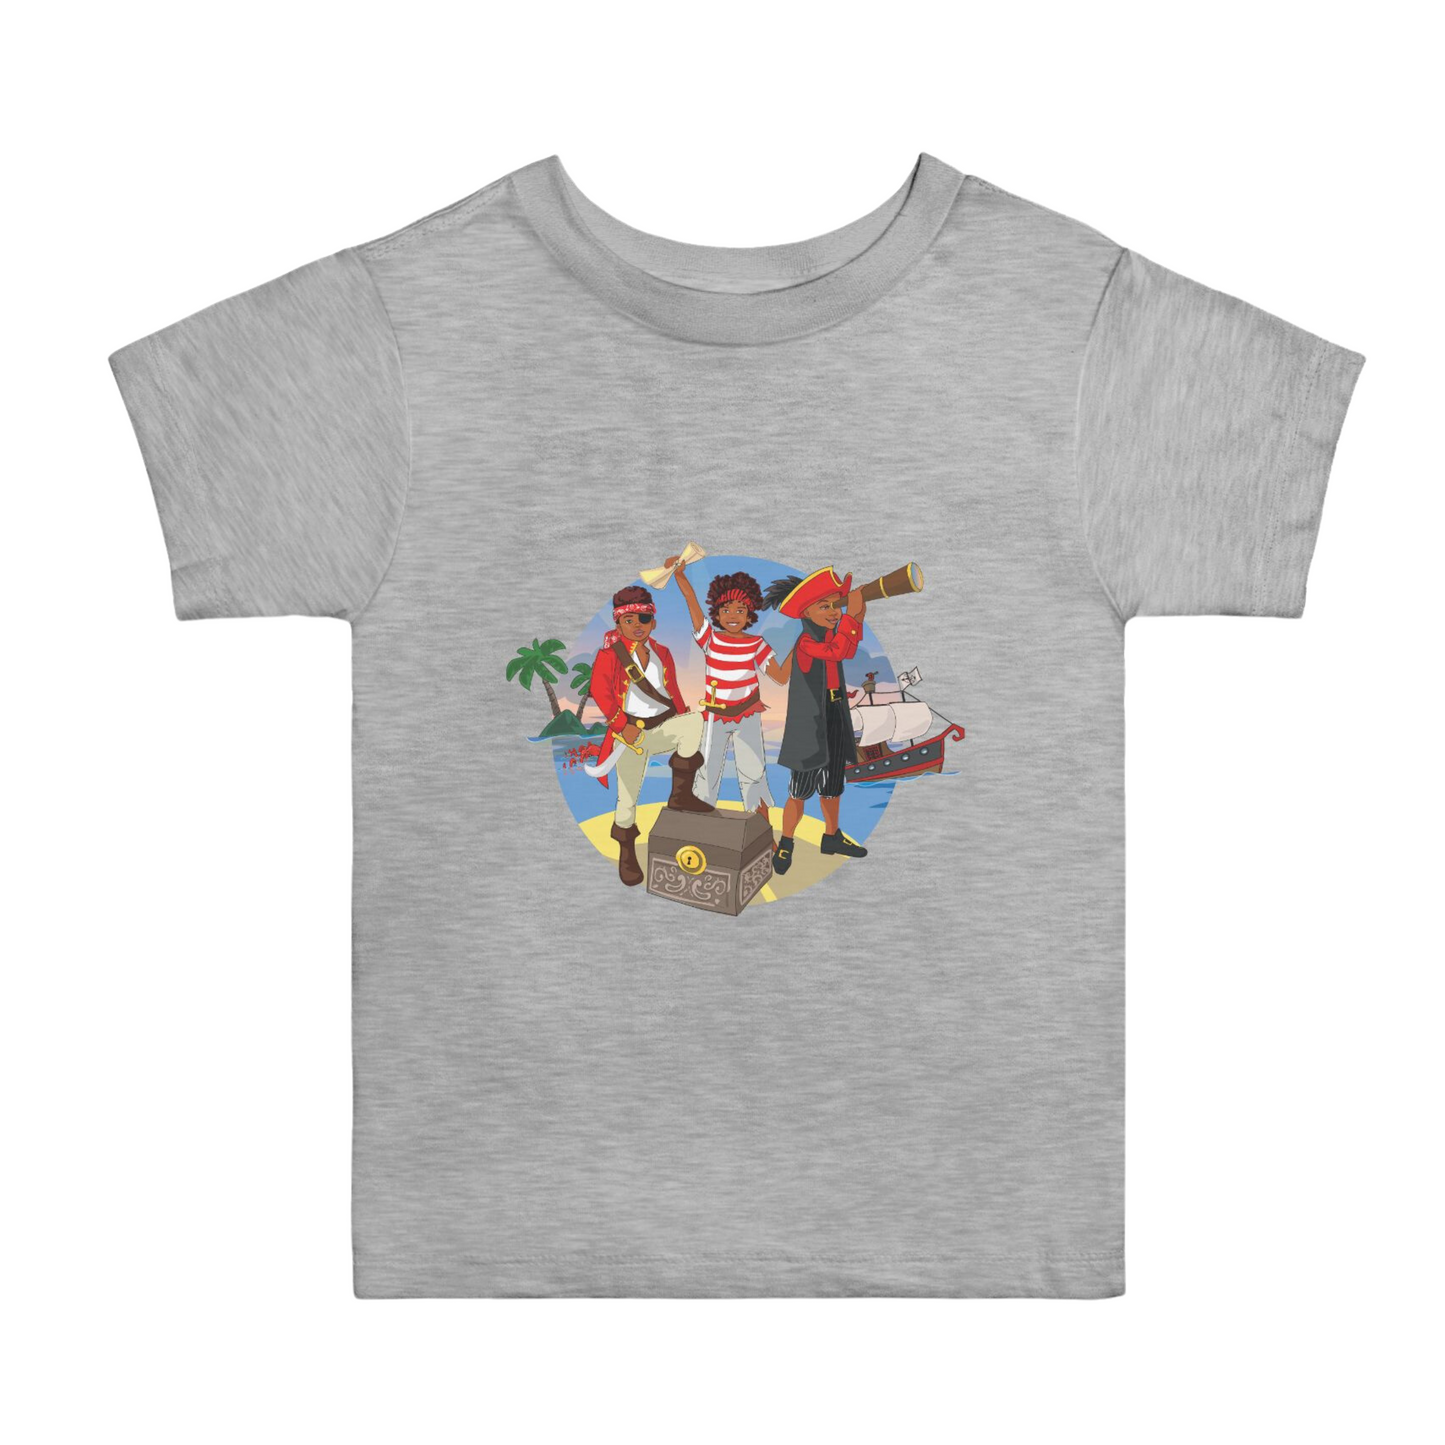 Pirate Boys T-Shirt | Baby/Toddler (2T-5T)